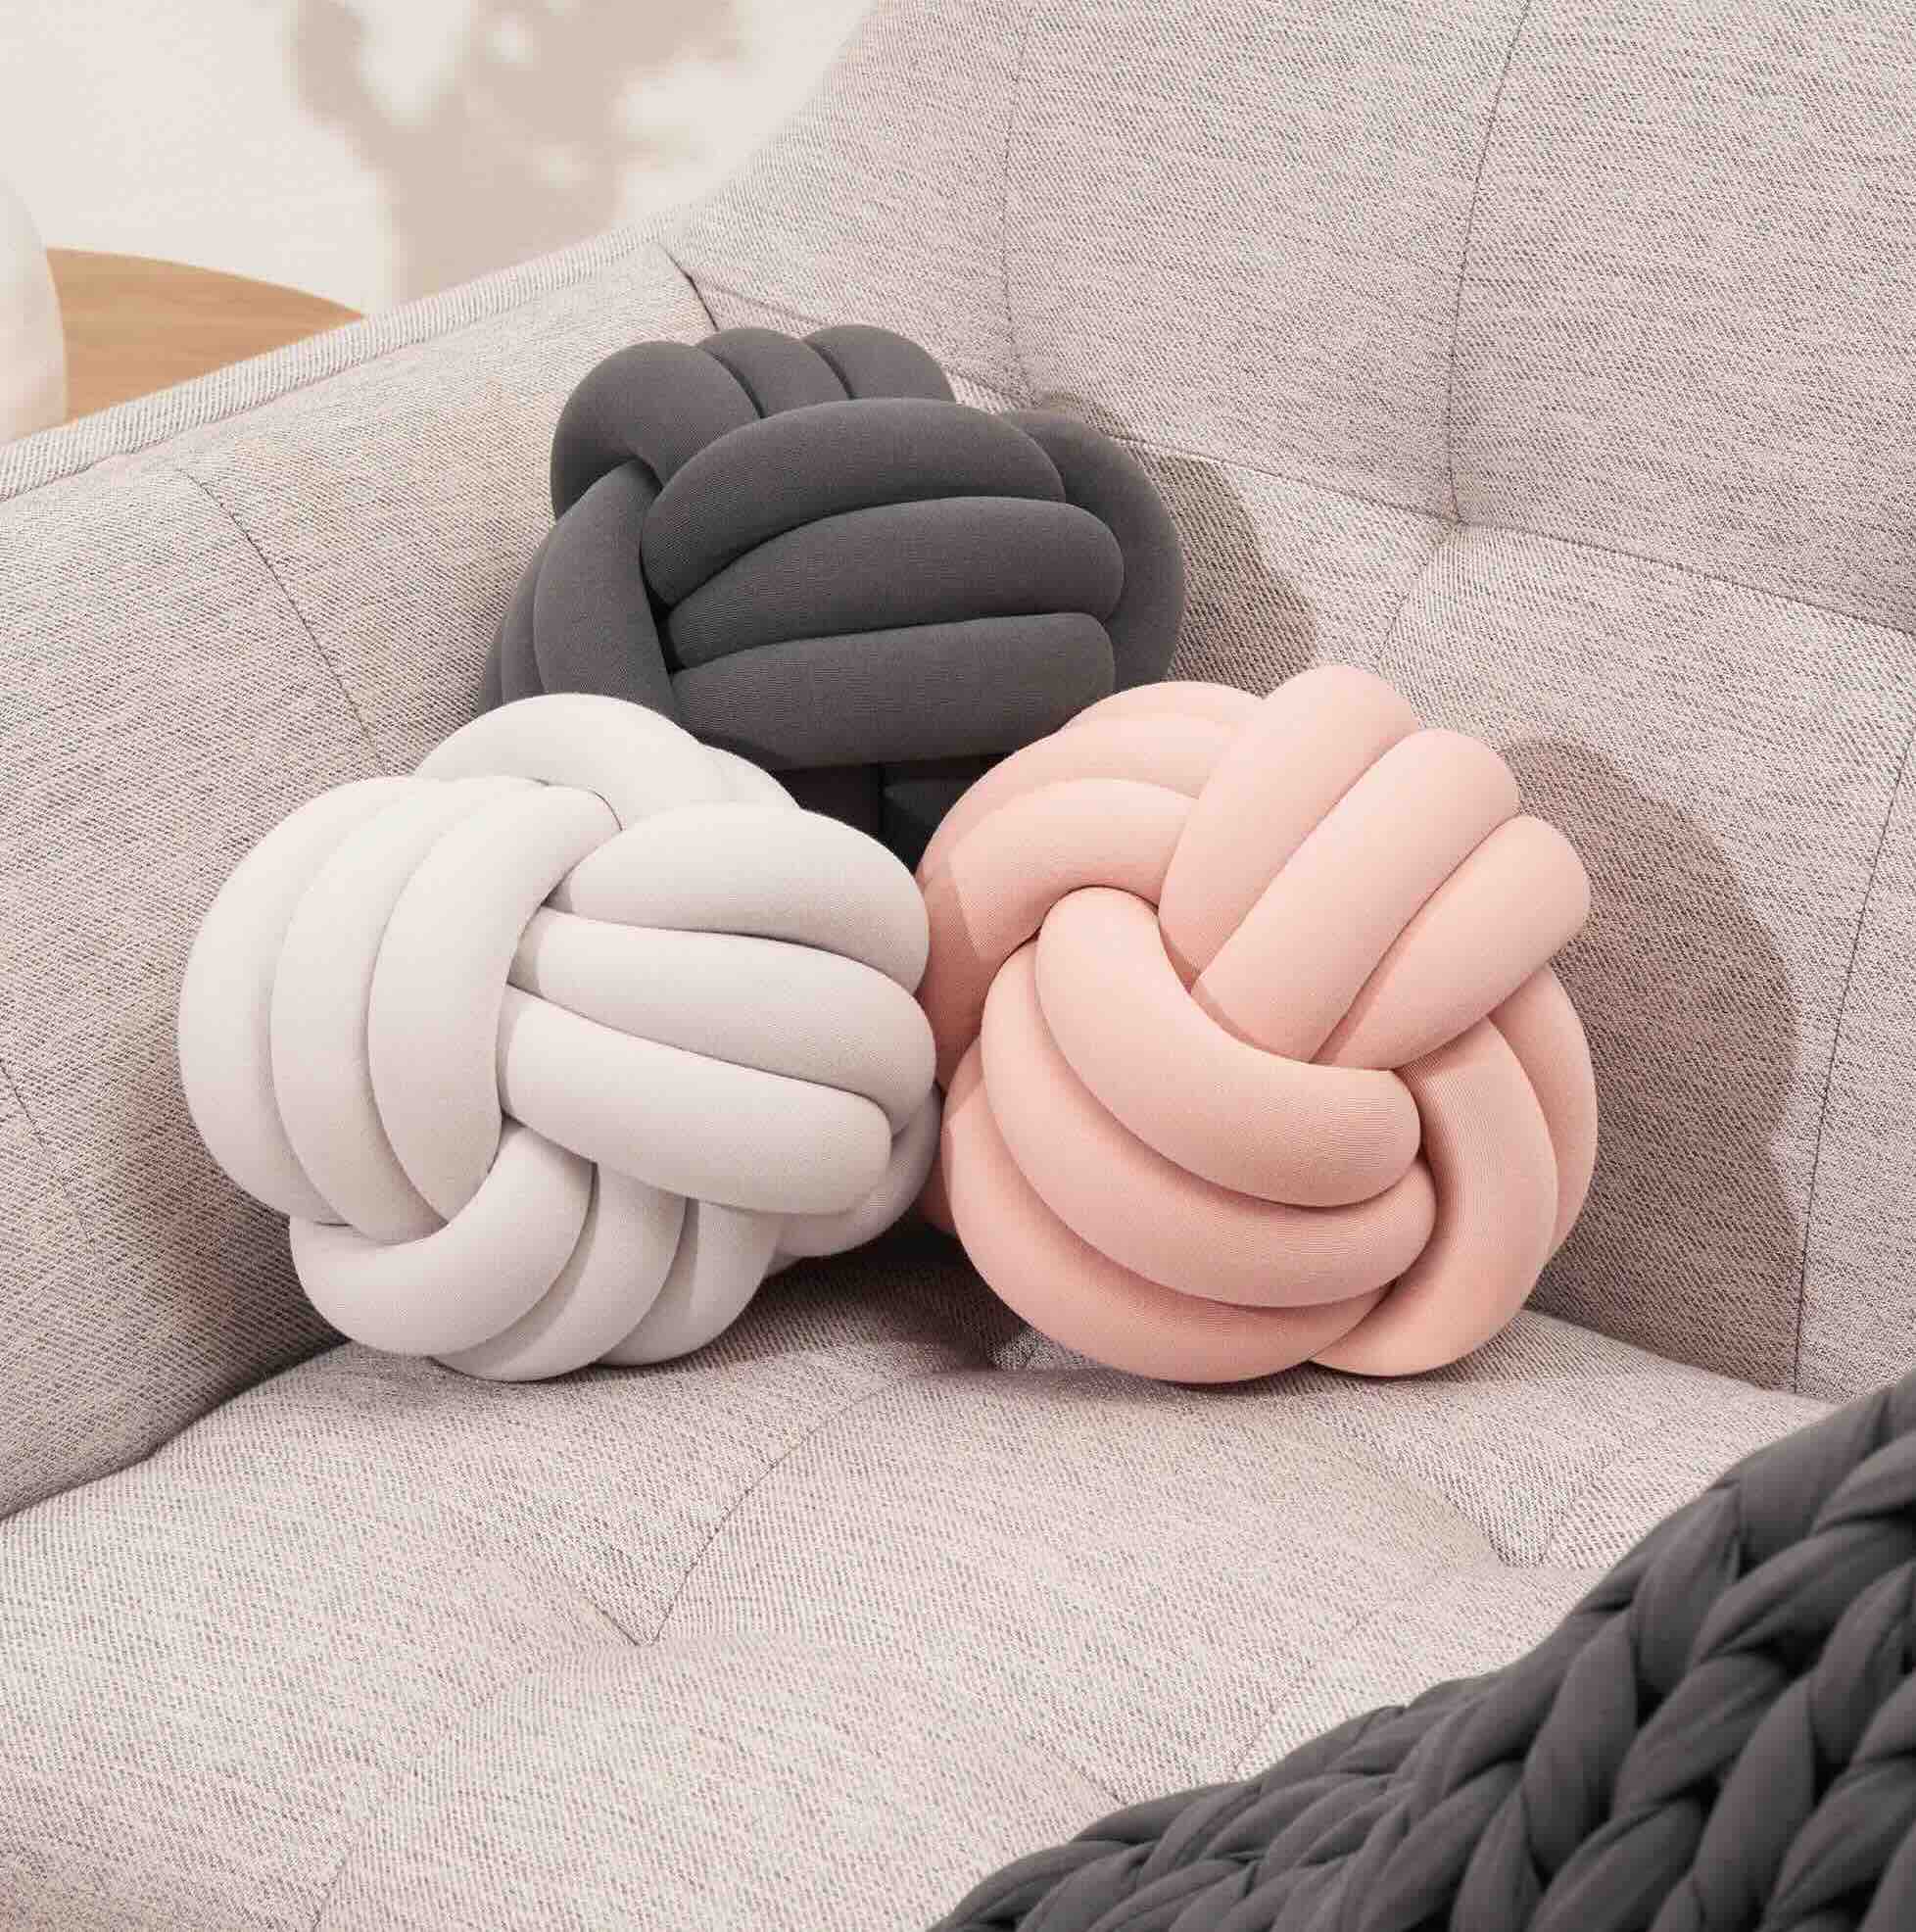 What Are Knot Pillows Used For